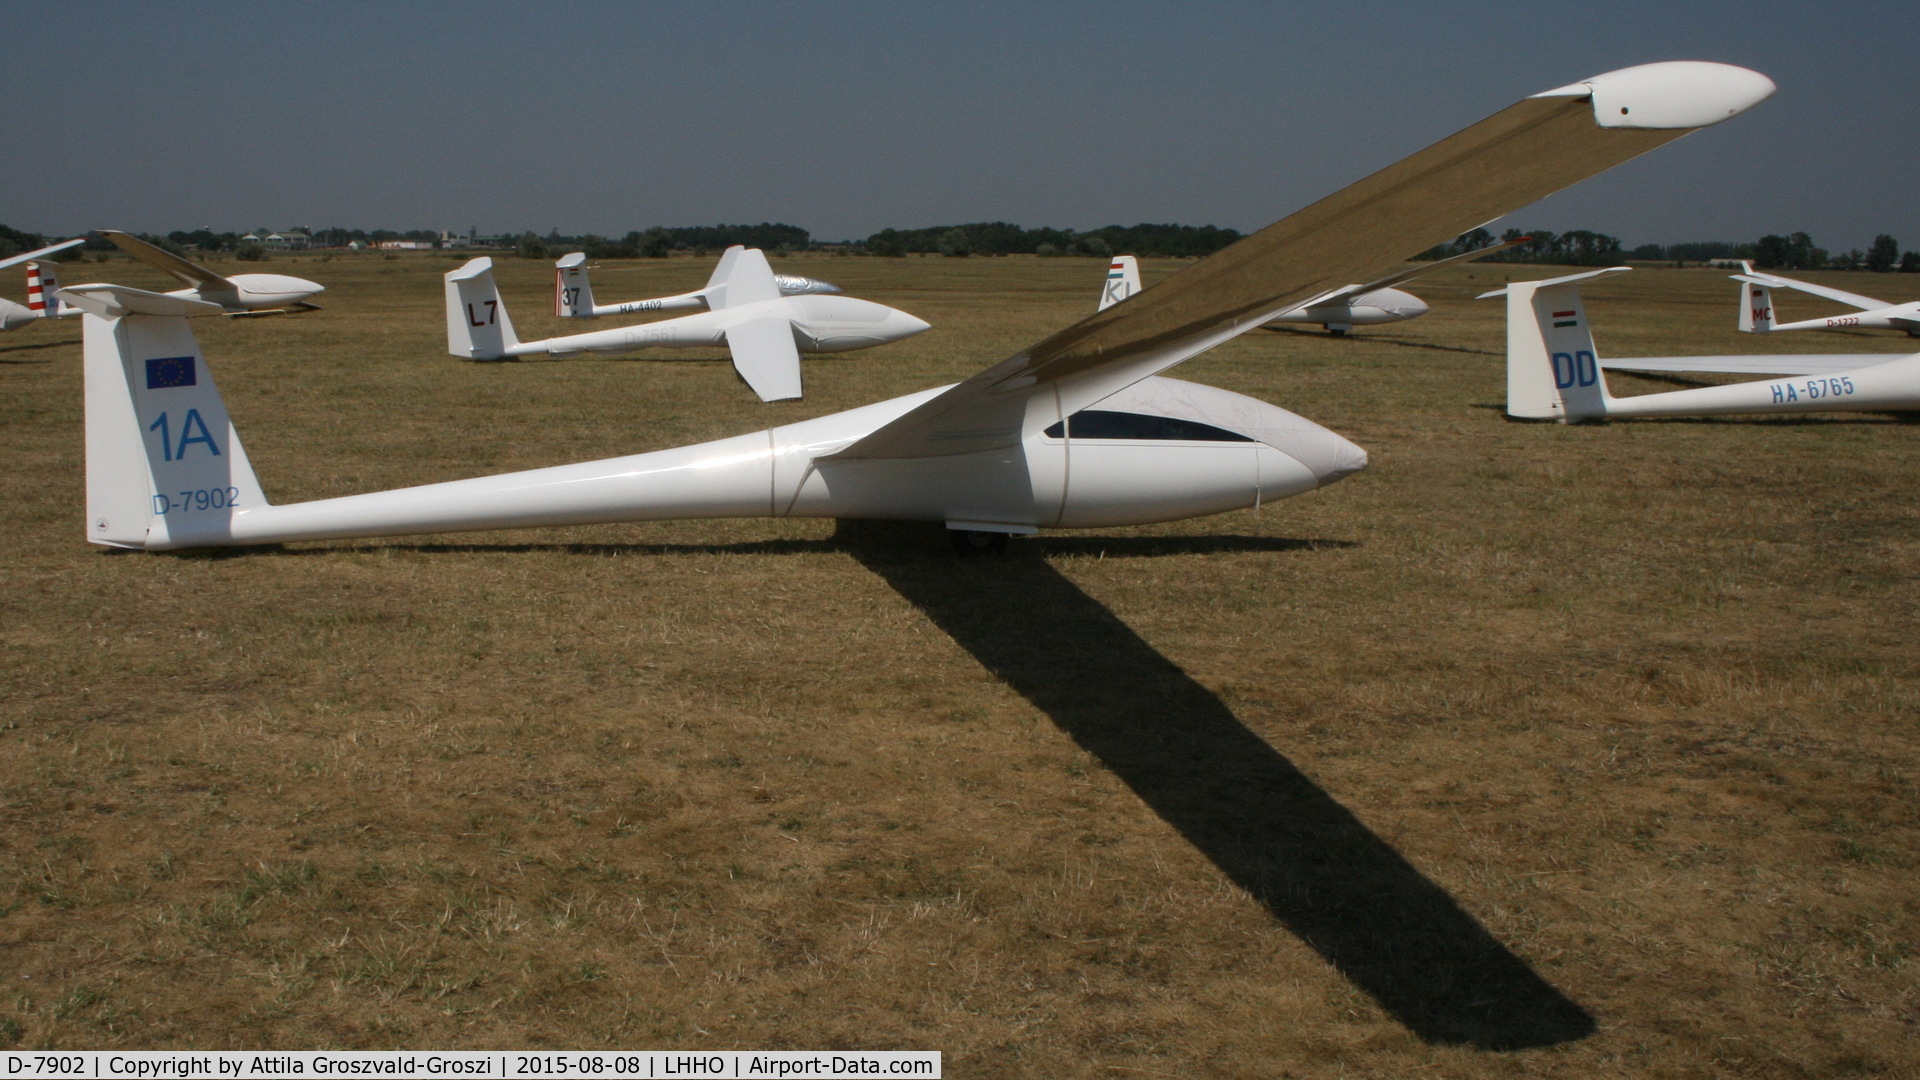 D-7902, 1977 Rolladen-Schneider LS-3a C/N 3012, Hajdúszoboszló Airport, Hungary - 60. Hungary Gliding National Championship and third Civis Thermal Cup, 2015